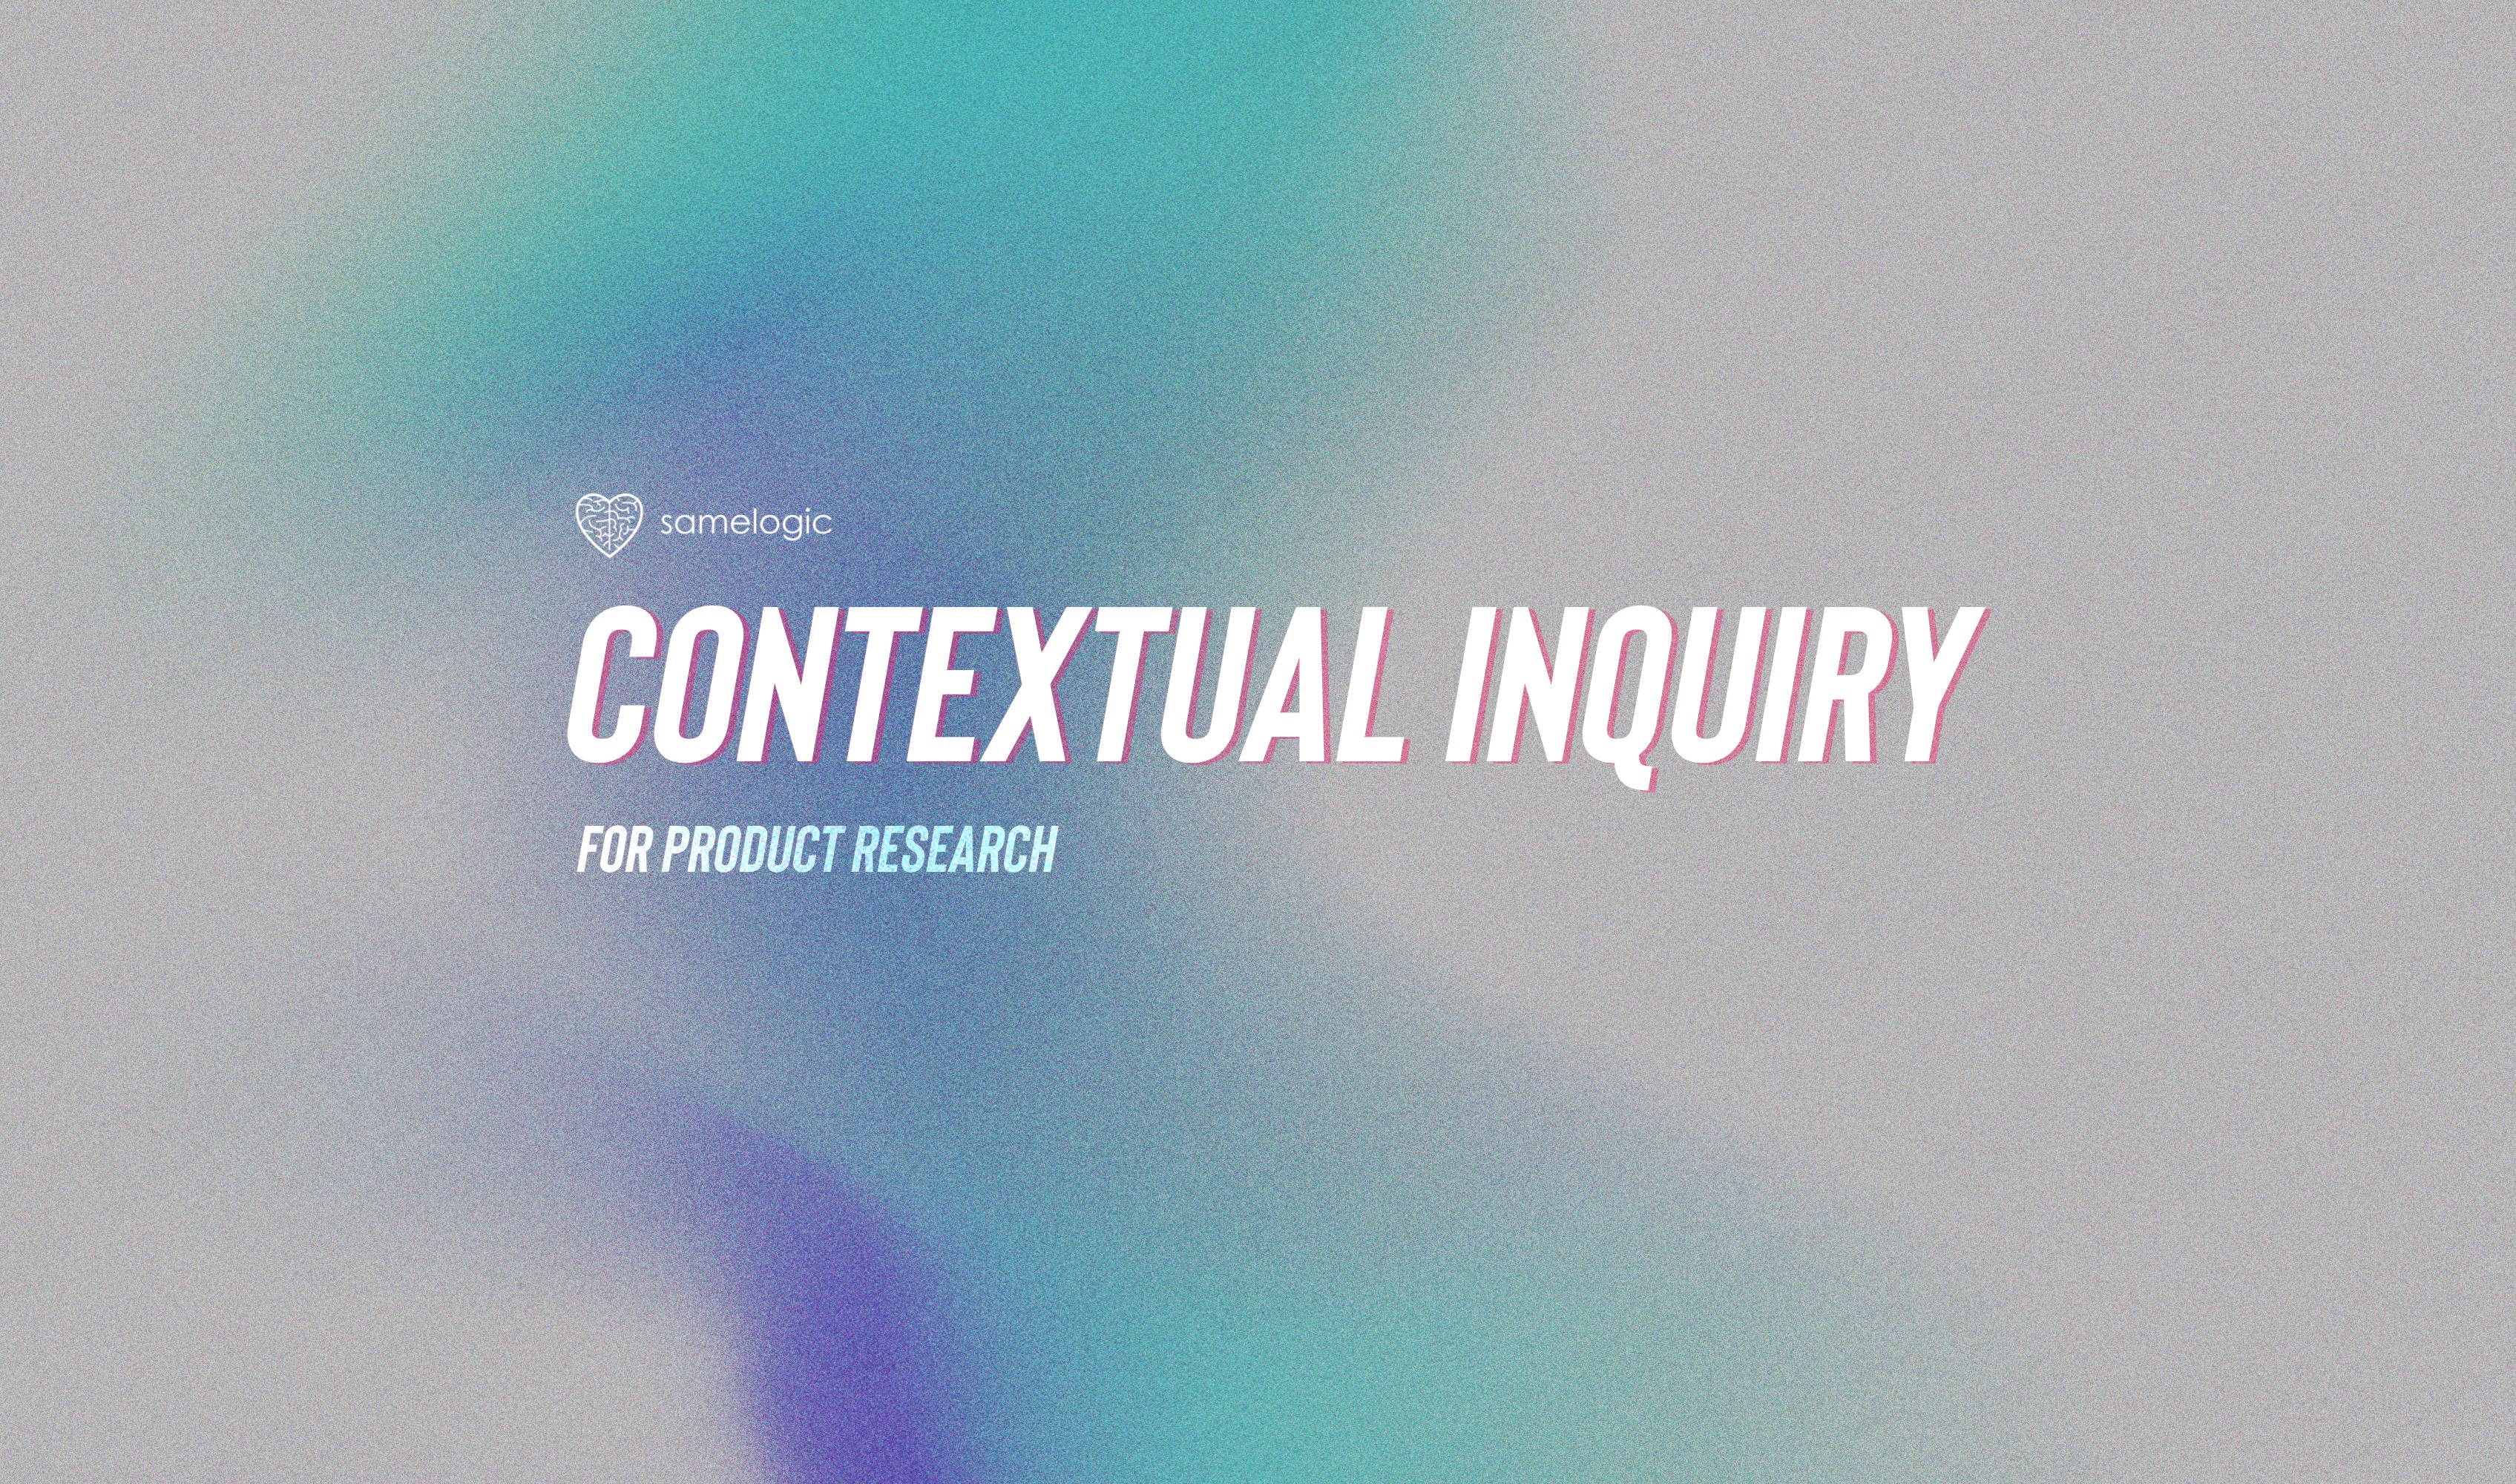 How to Use Contextual Inquiry for Product Research